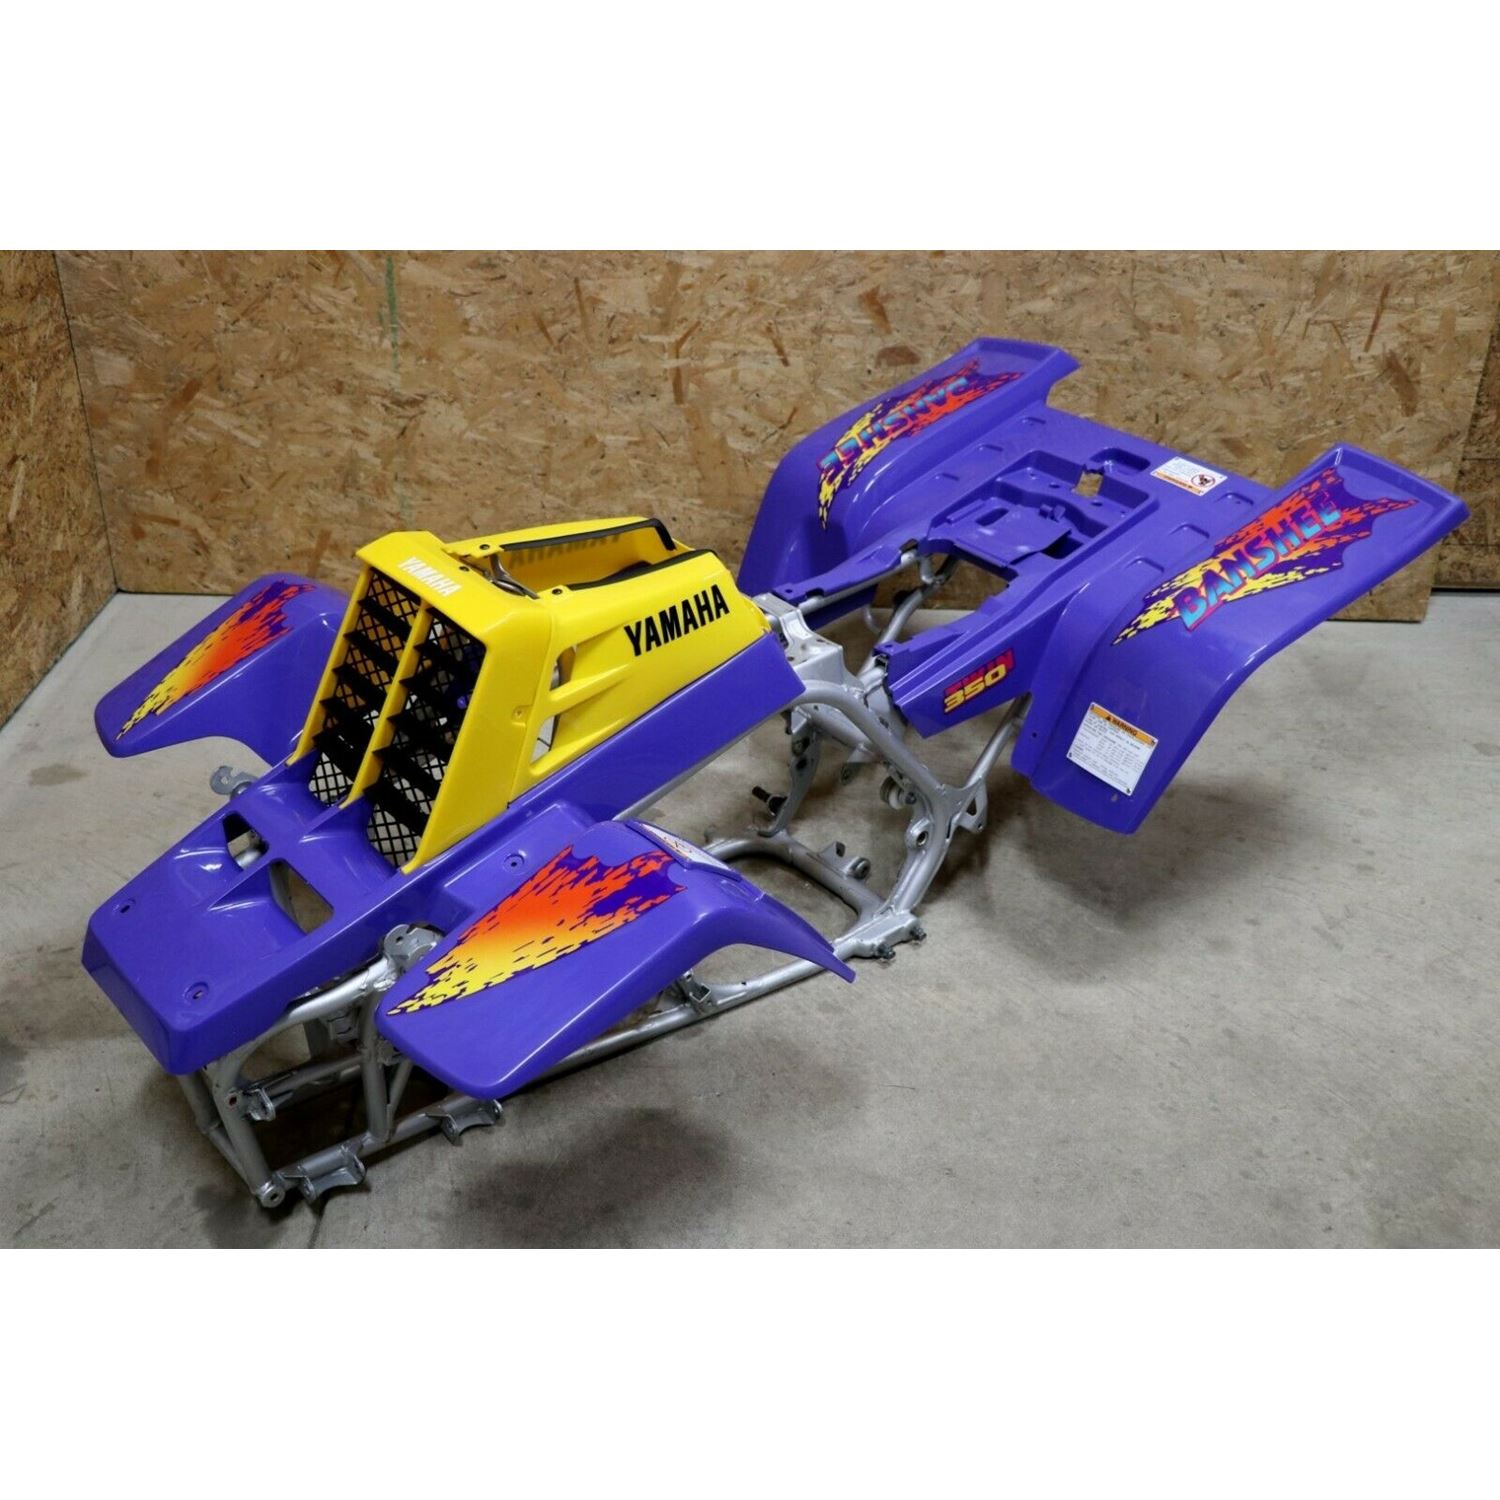 1994 Banshee purple and yellow fenders - excellent